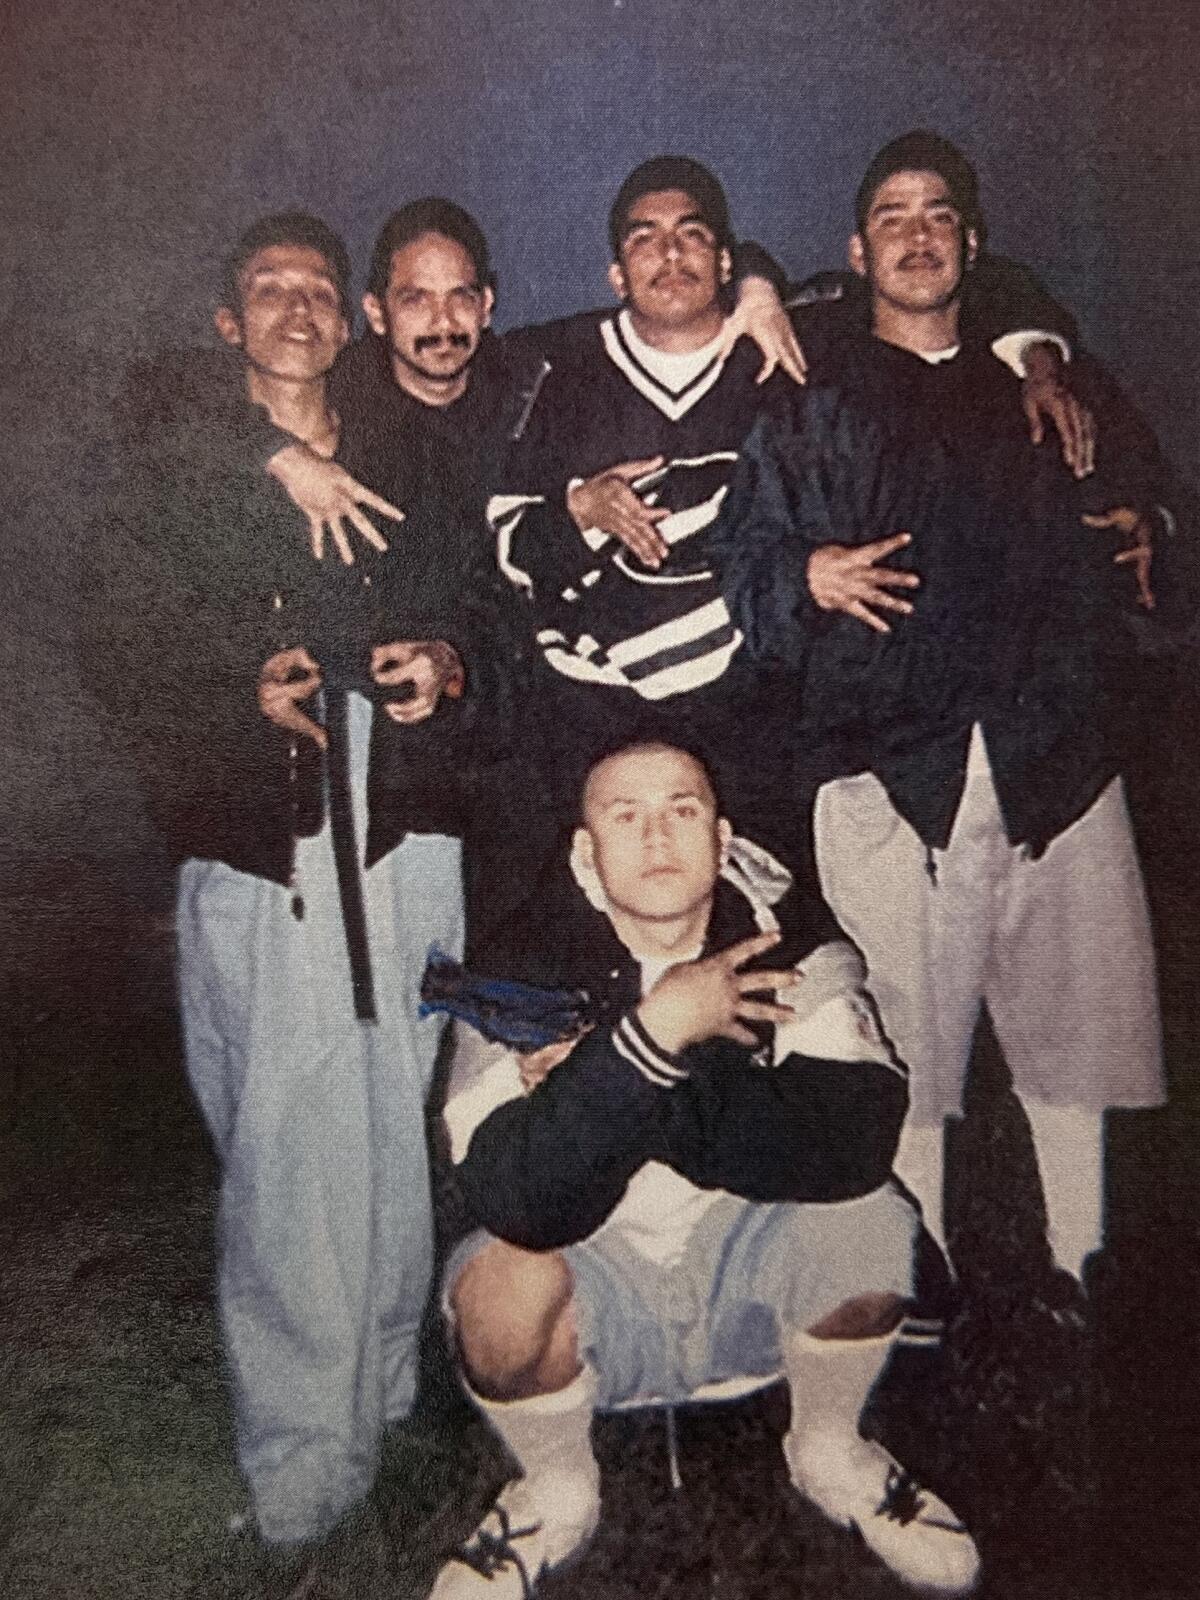 Jose Saenz, shown squatting in the foreground, was a member of the Cuatro Flats gang nicknamed Smiley.